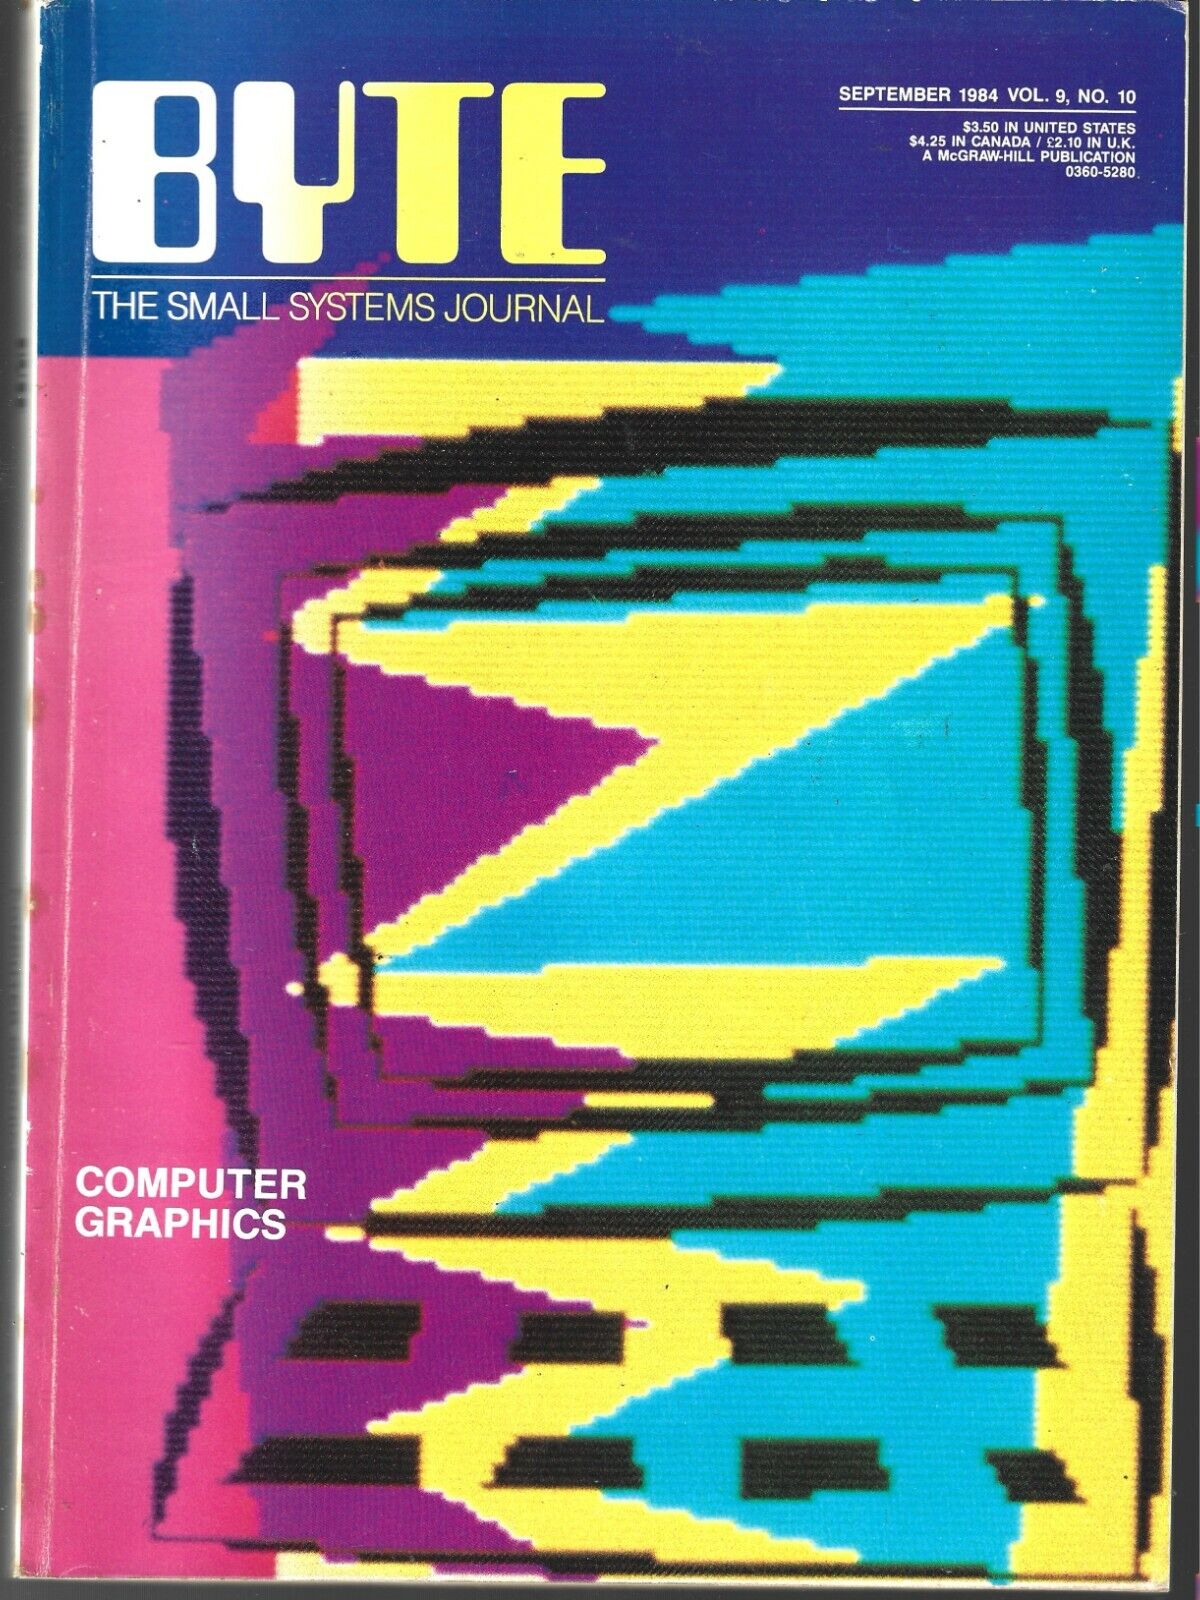 BYTE THE SMALL SYSTEMS JOURNAL MAGAZINE SEPTEMBER 1984 VOL. 9 NO. 10 (FN)